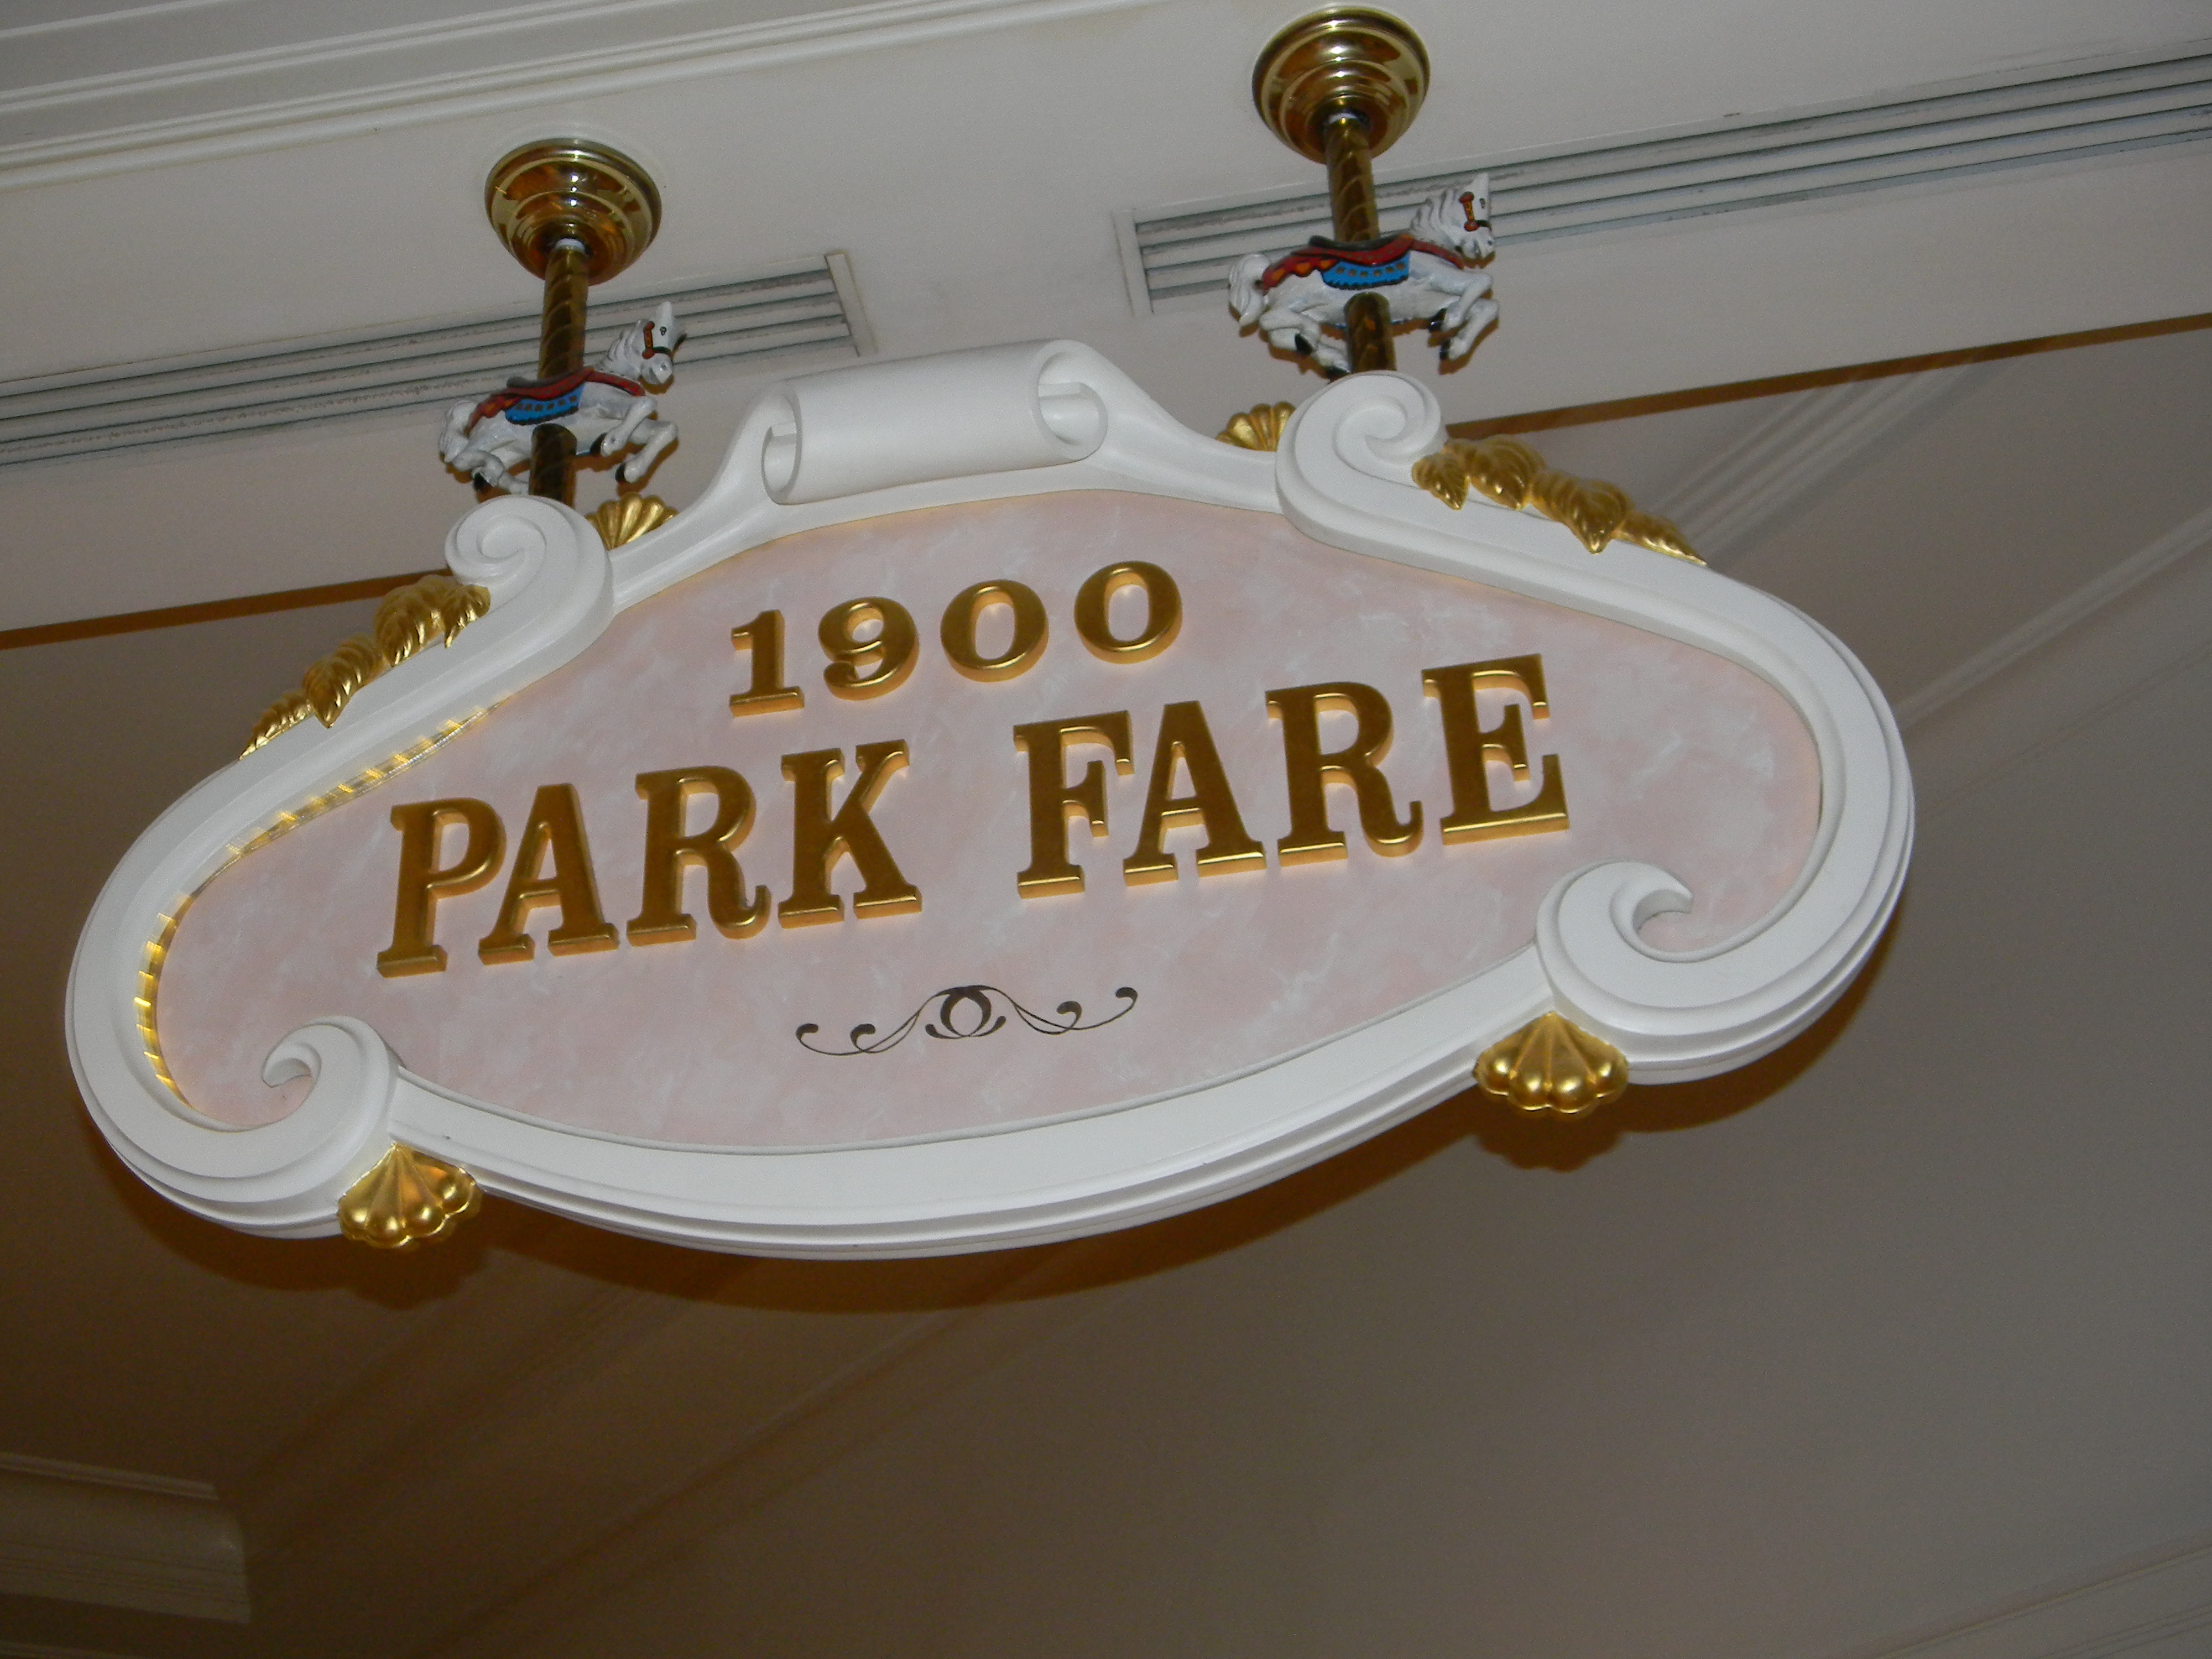 Walt Disney World’s 1900 Park Fare – Character Dining at its Best